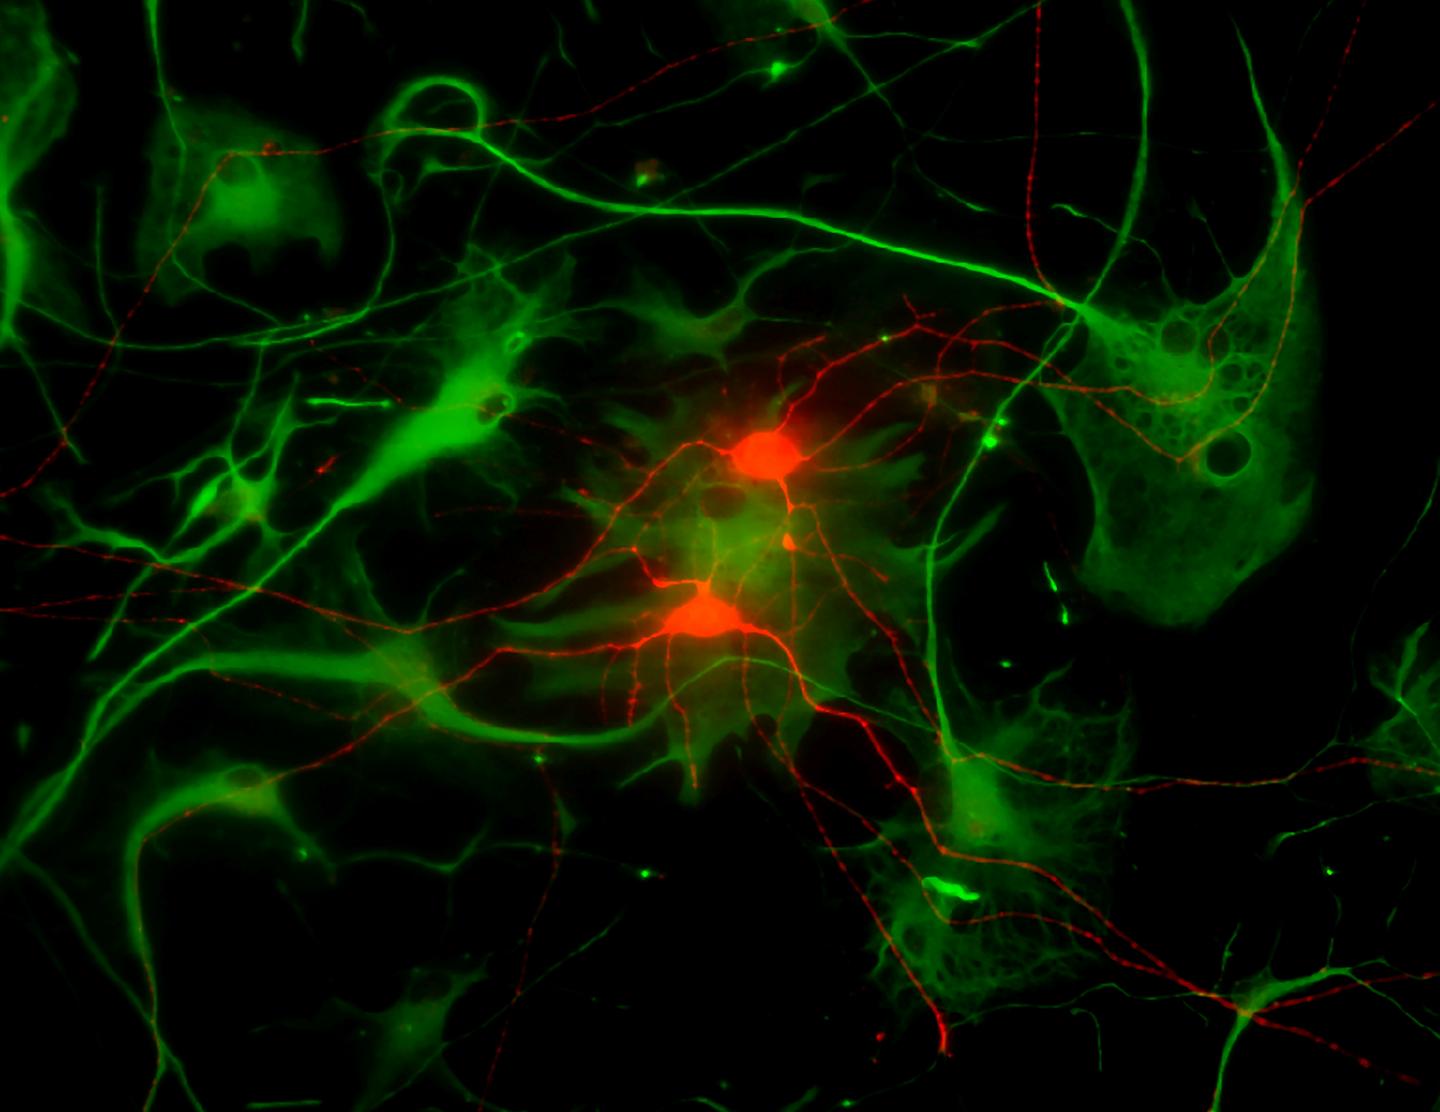 RGCs and Astrocytes